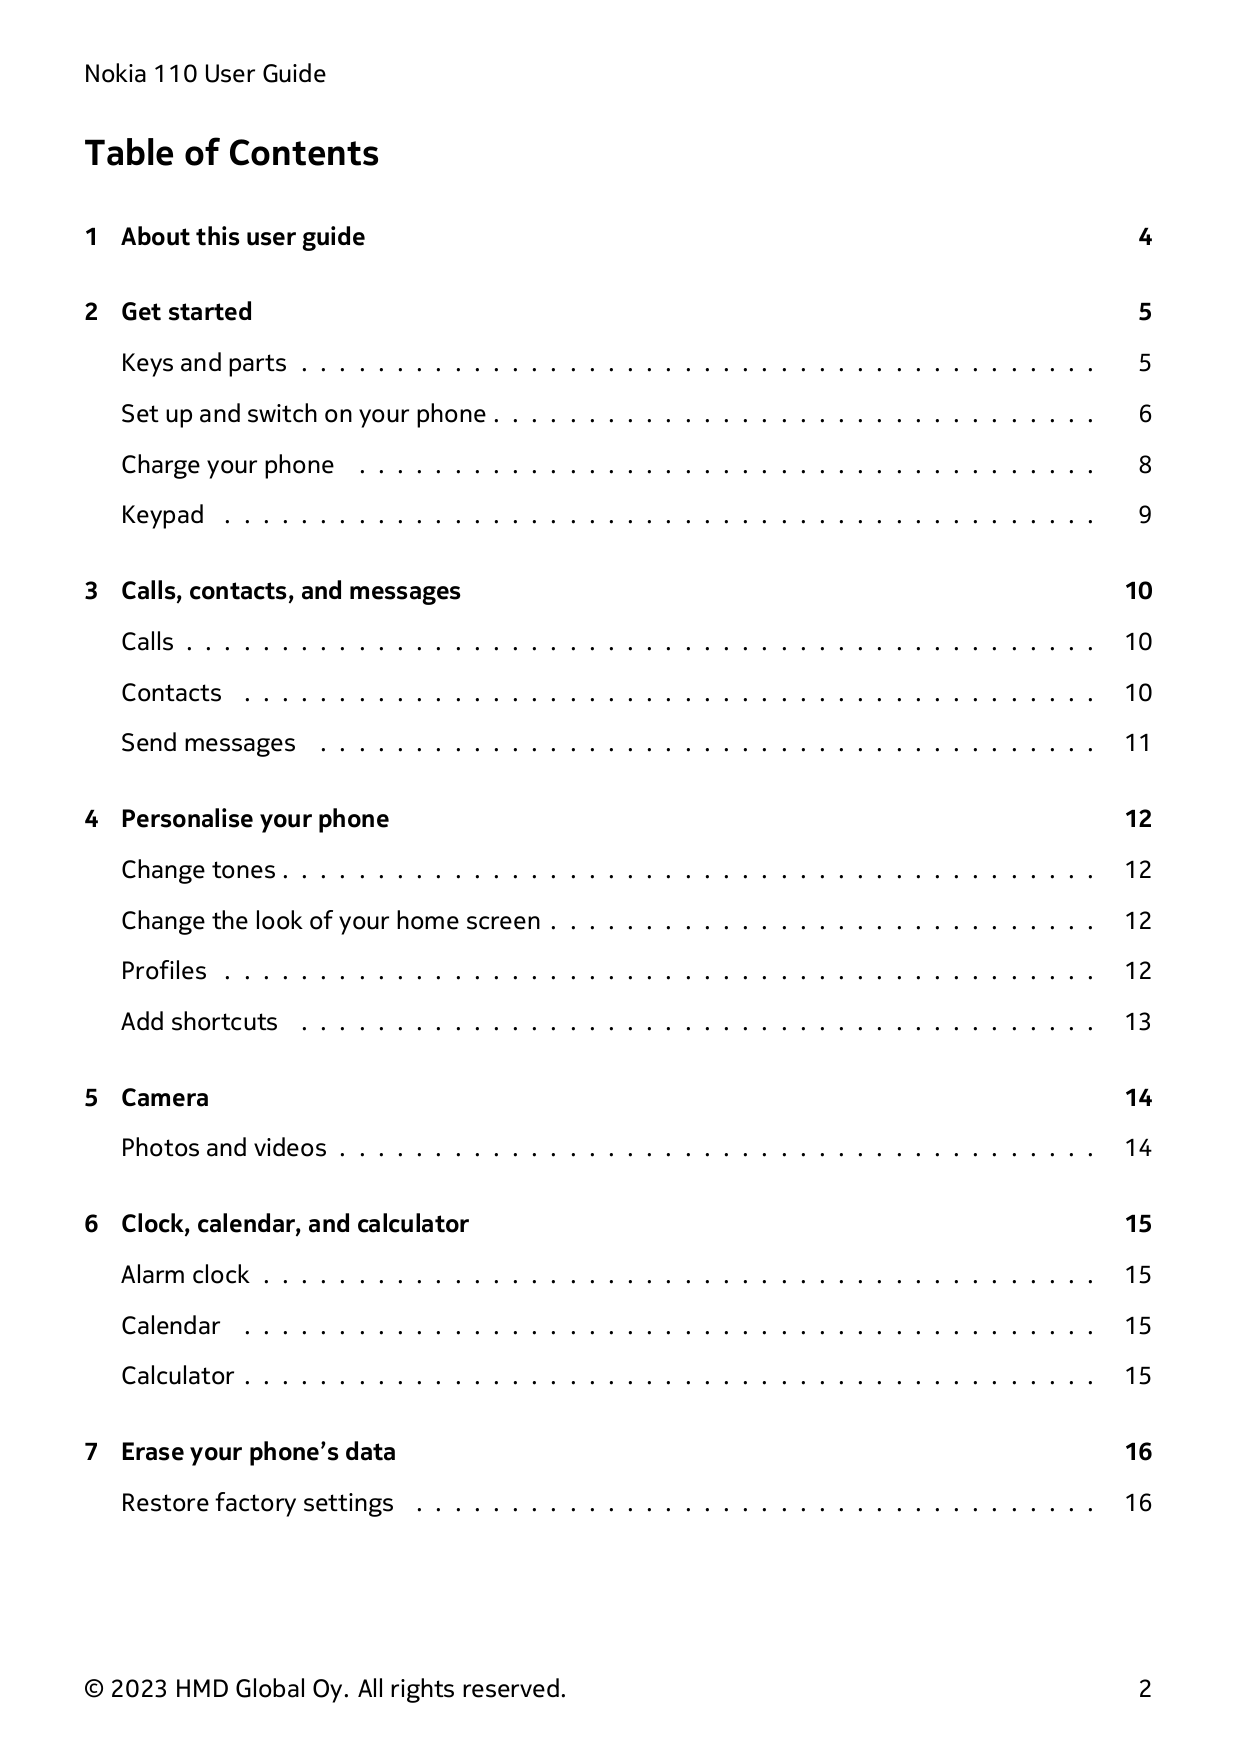 Nokia 110 User GuideTable of Contents1 About this user guide42 Get started5Keys and parts . . . . . . . . . . . . . . . . . . . 